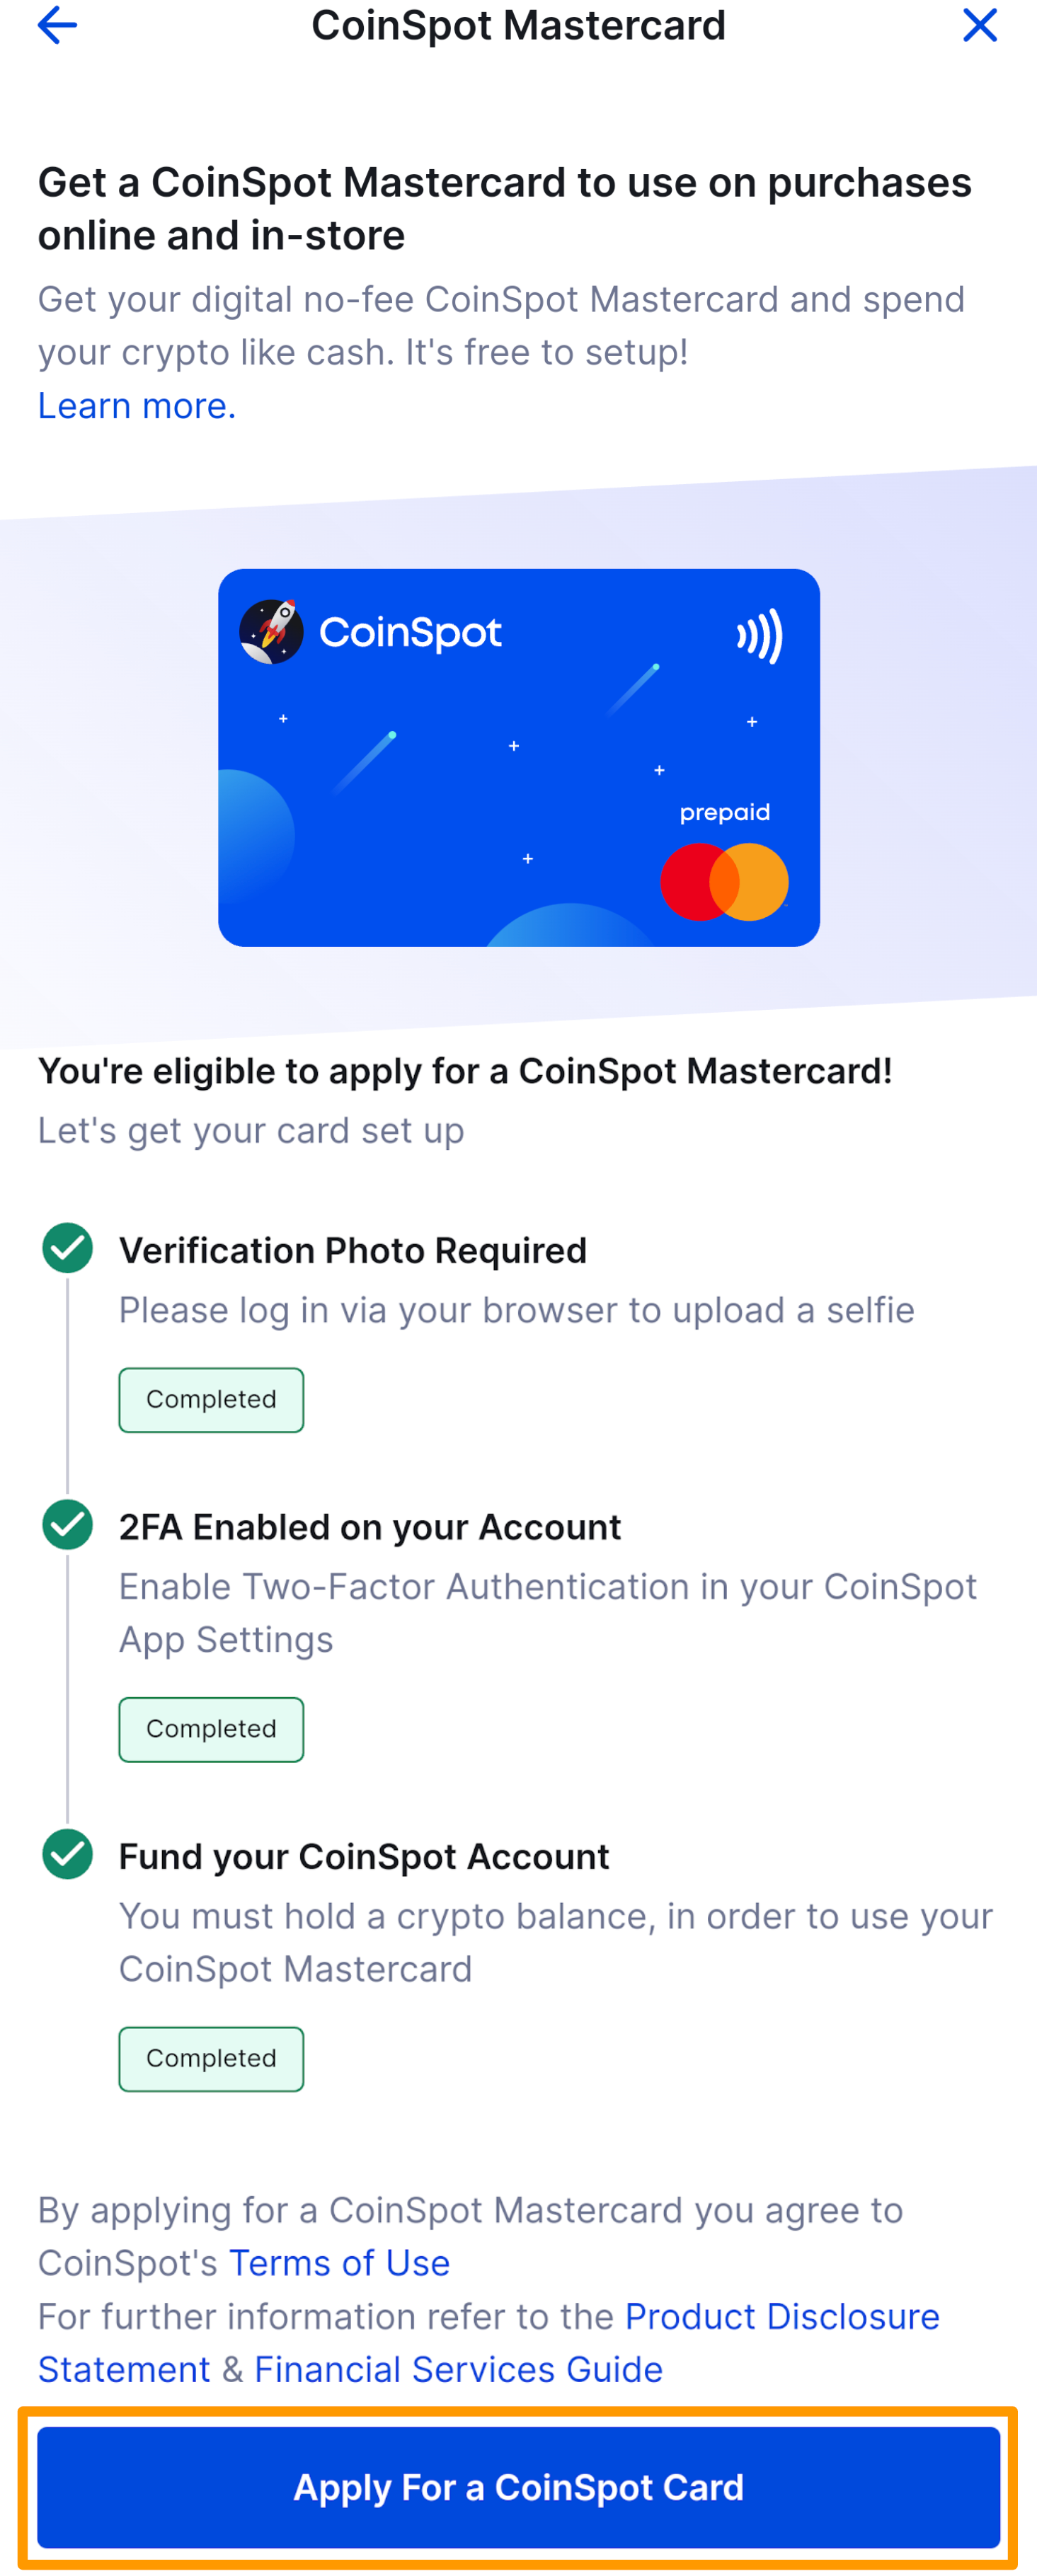 CoinSpot Mastercard - Get Started Guide - Figure 2.png